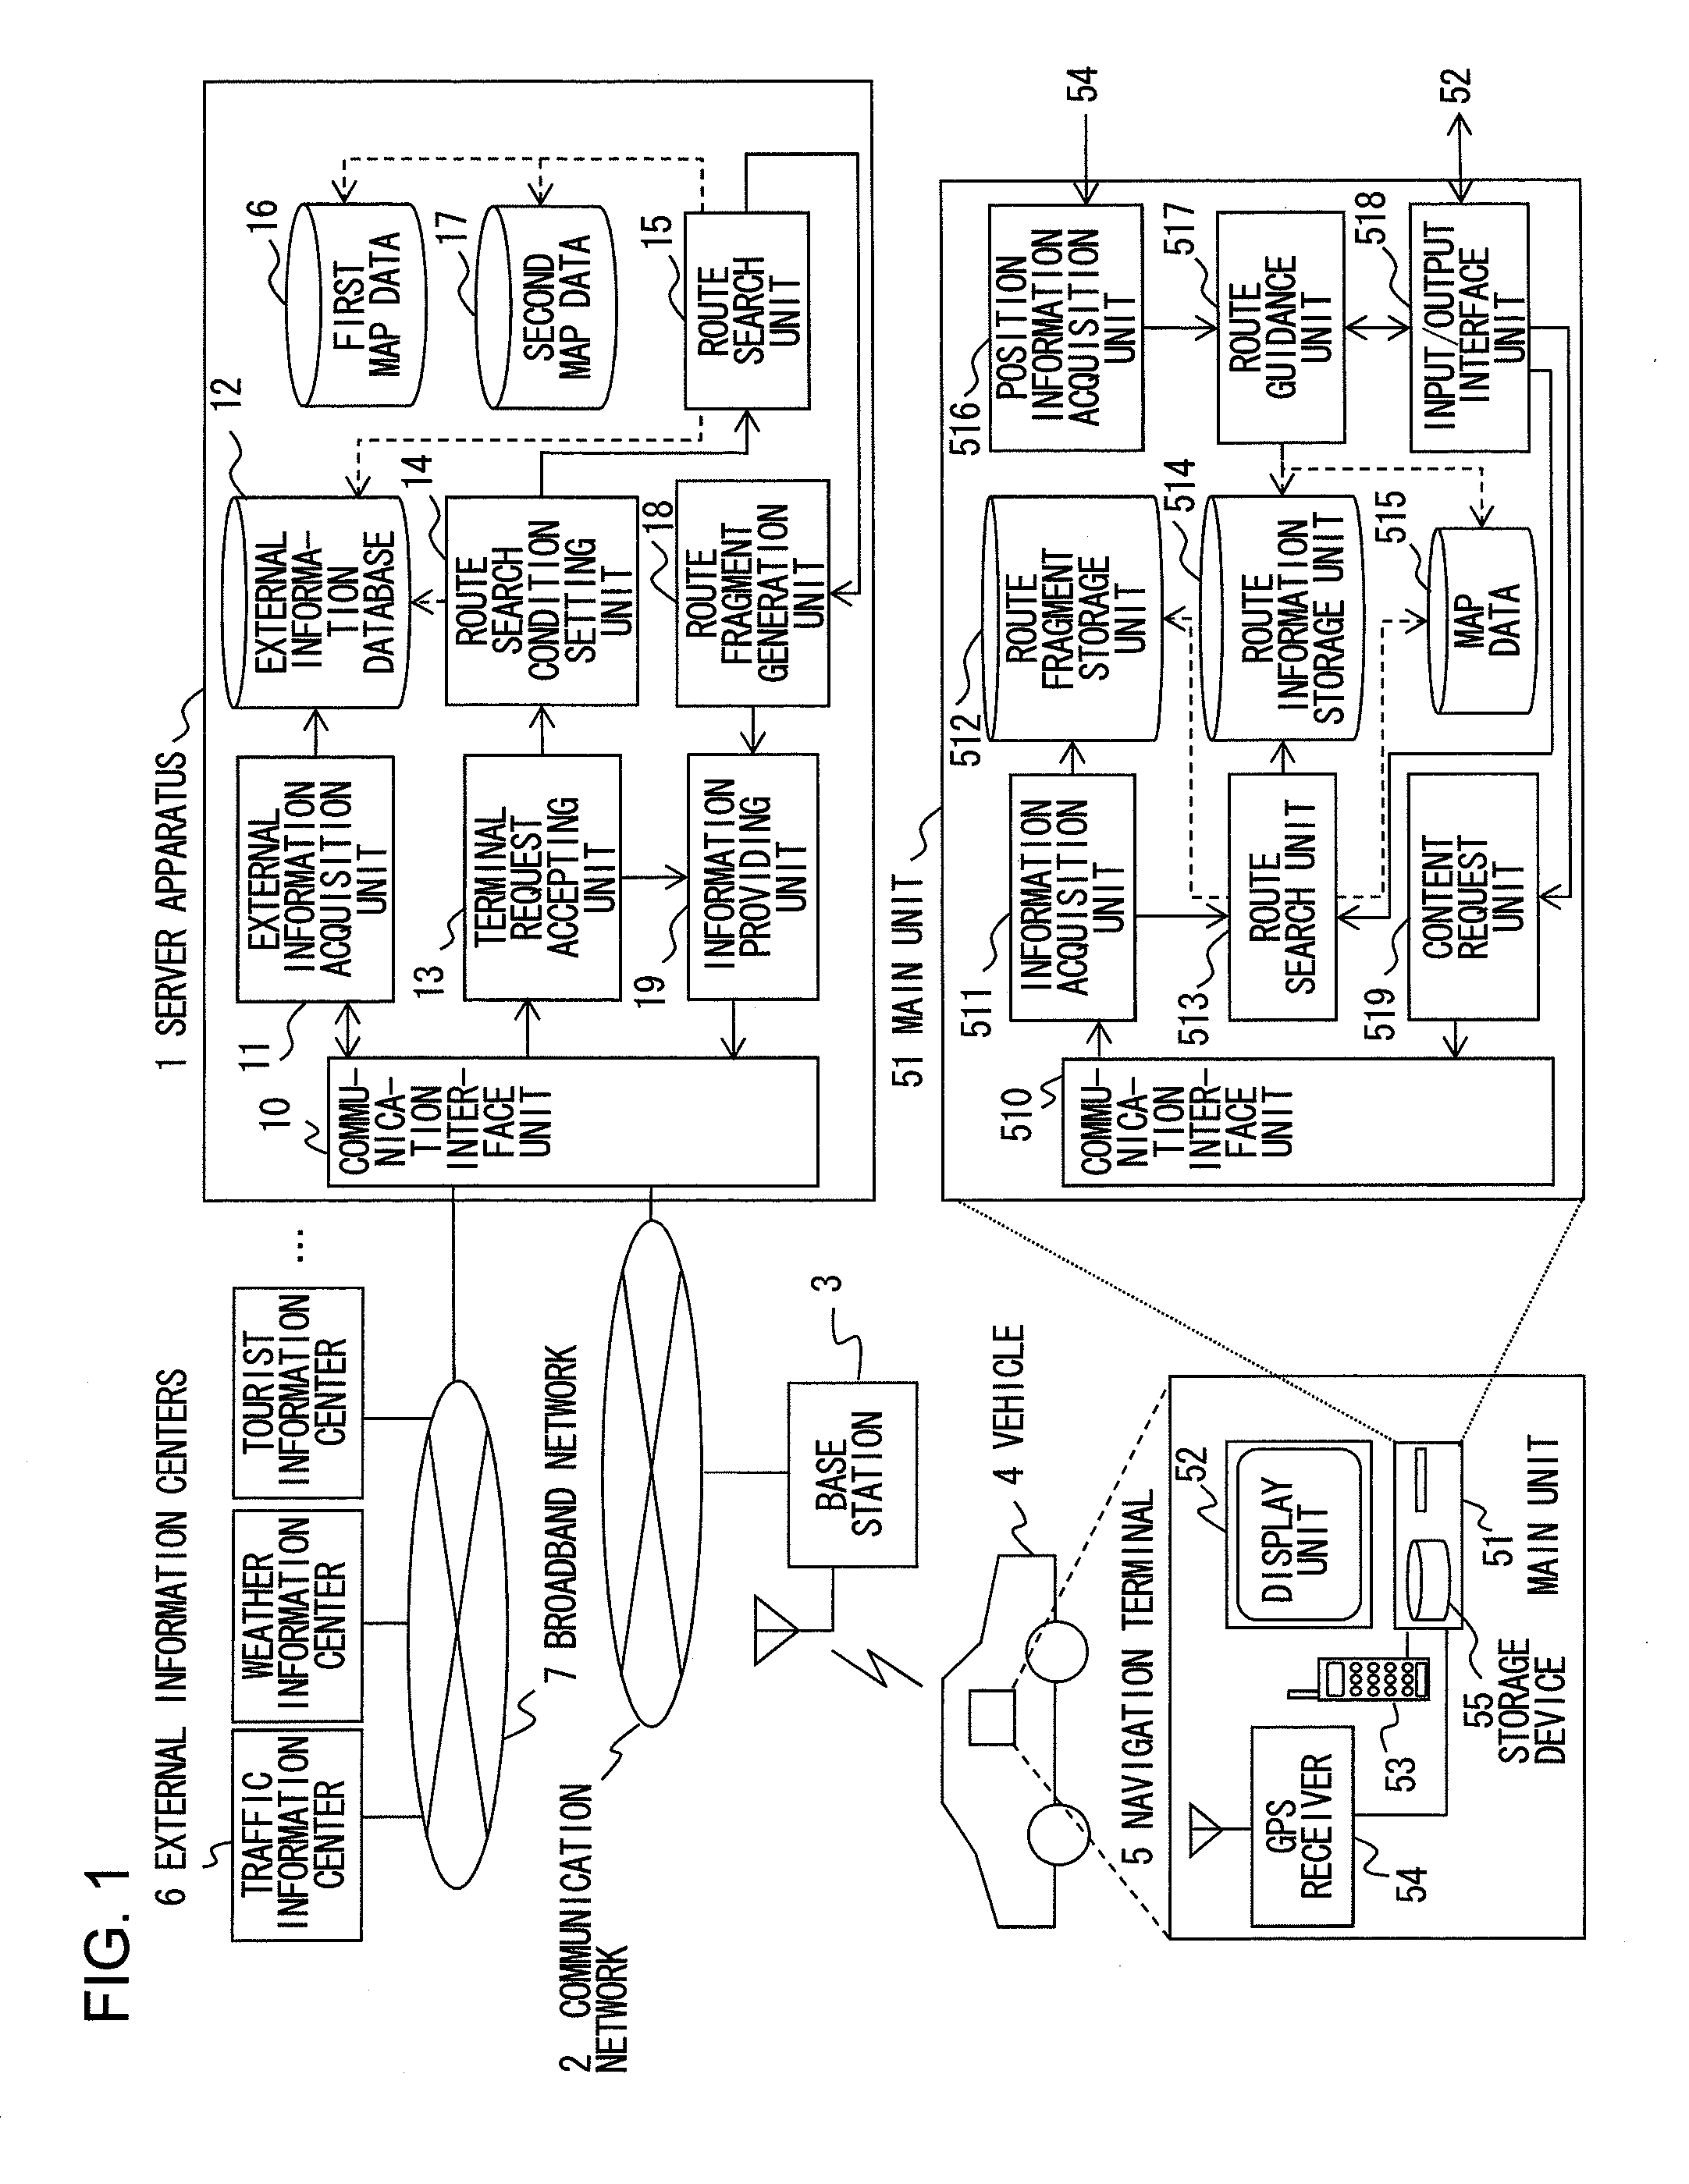 Route Guidance System, Route Guidance Server Apparatus and Navigation Terminal Apparatus